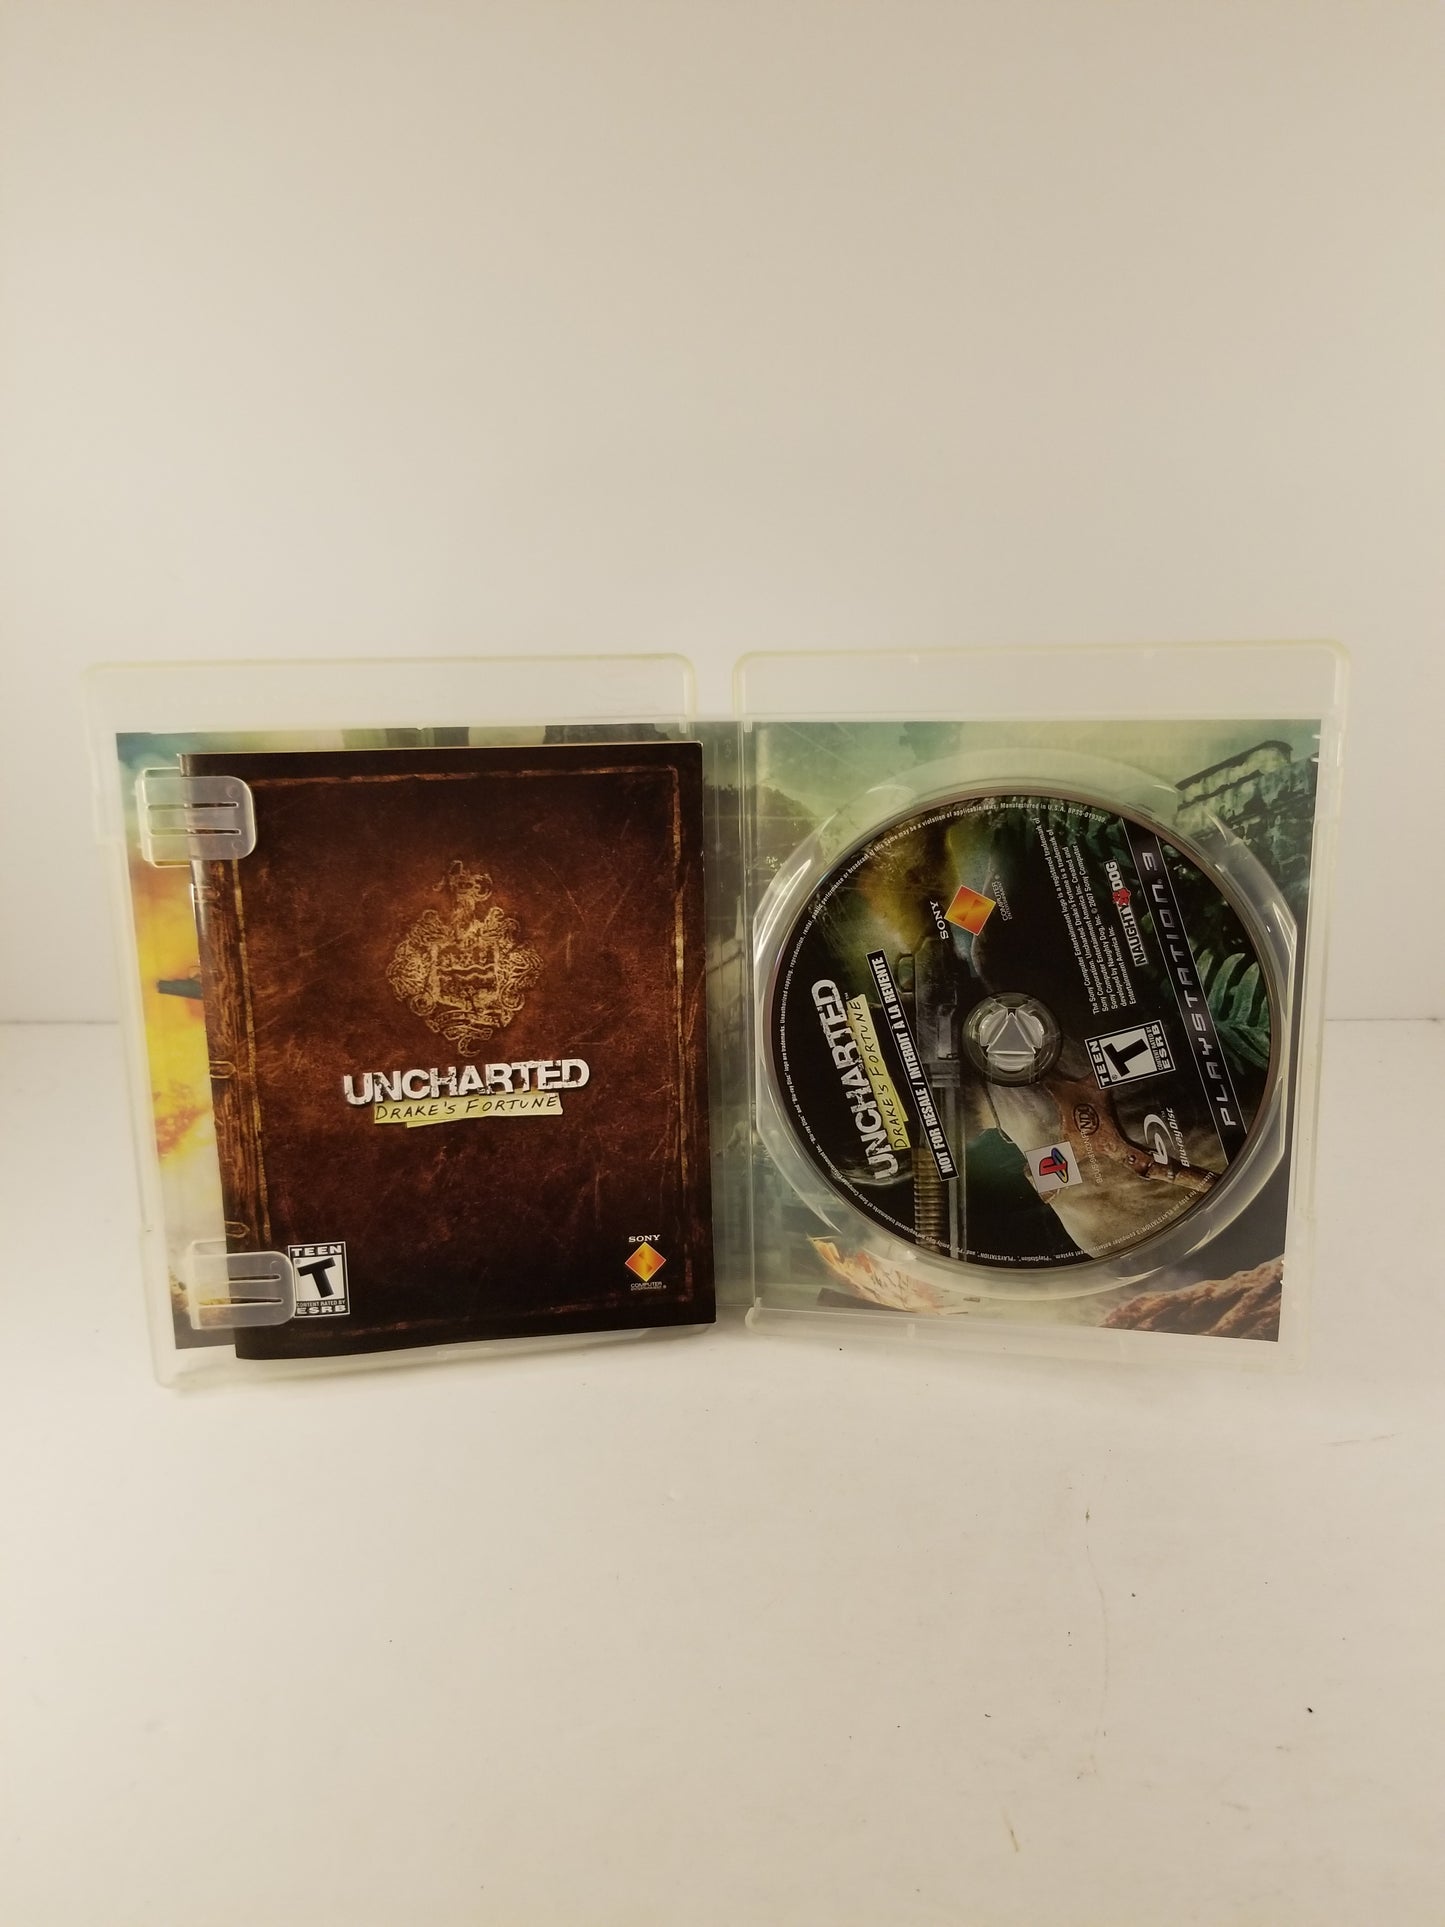 Uncharted Drake's Fortune - PlayStation 3